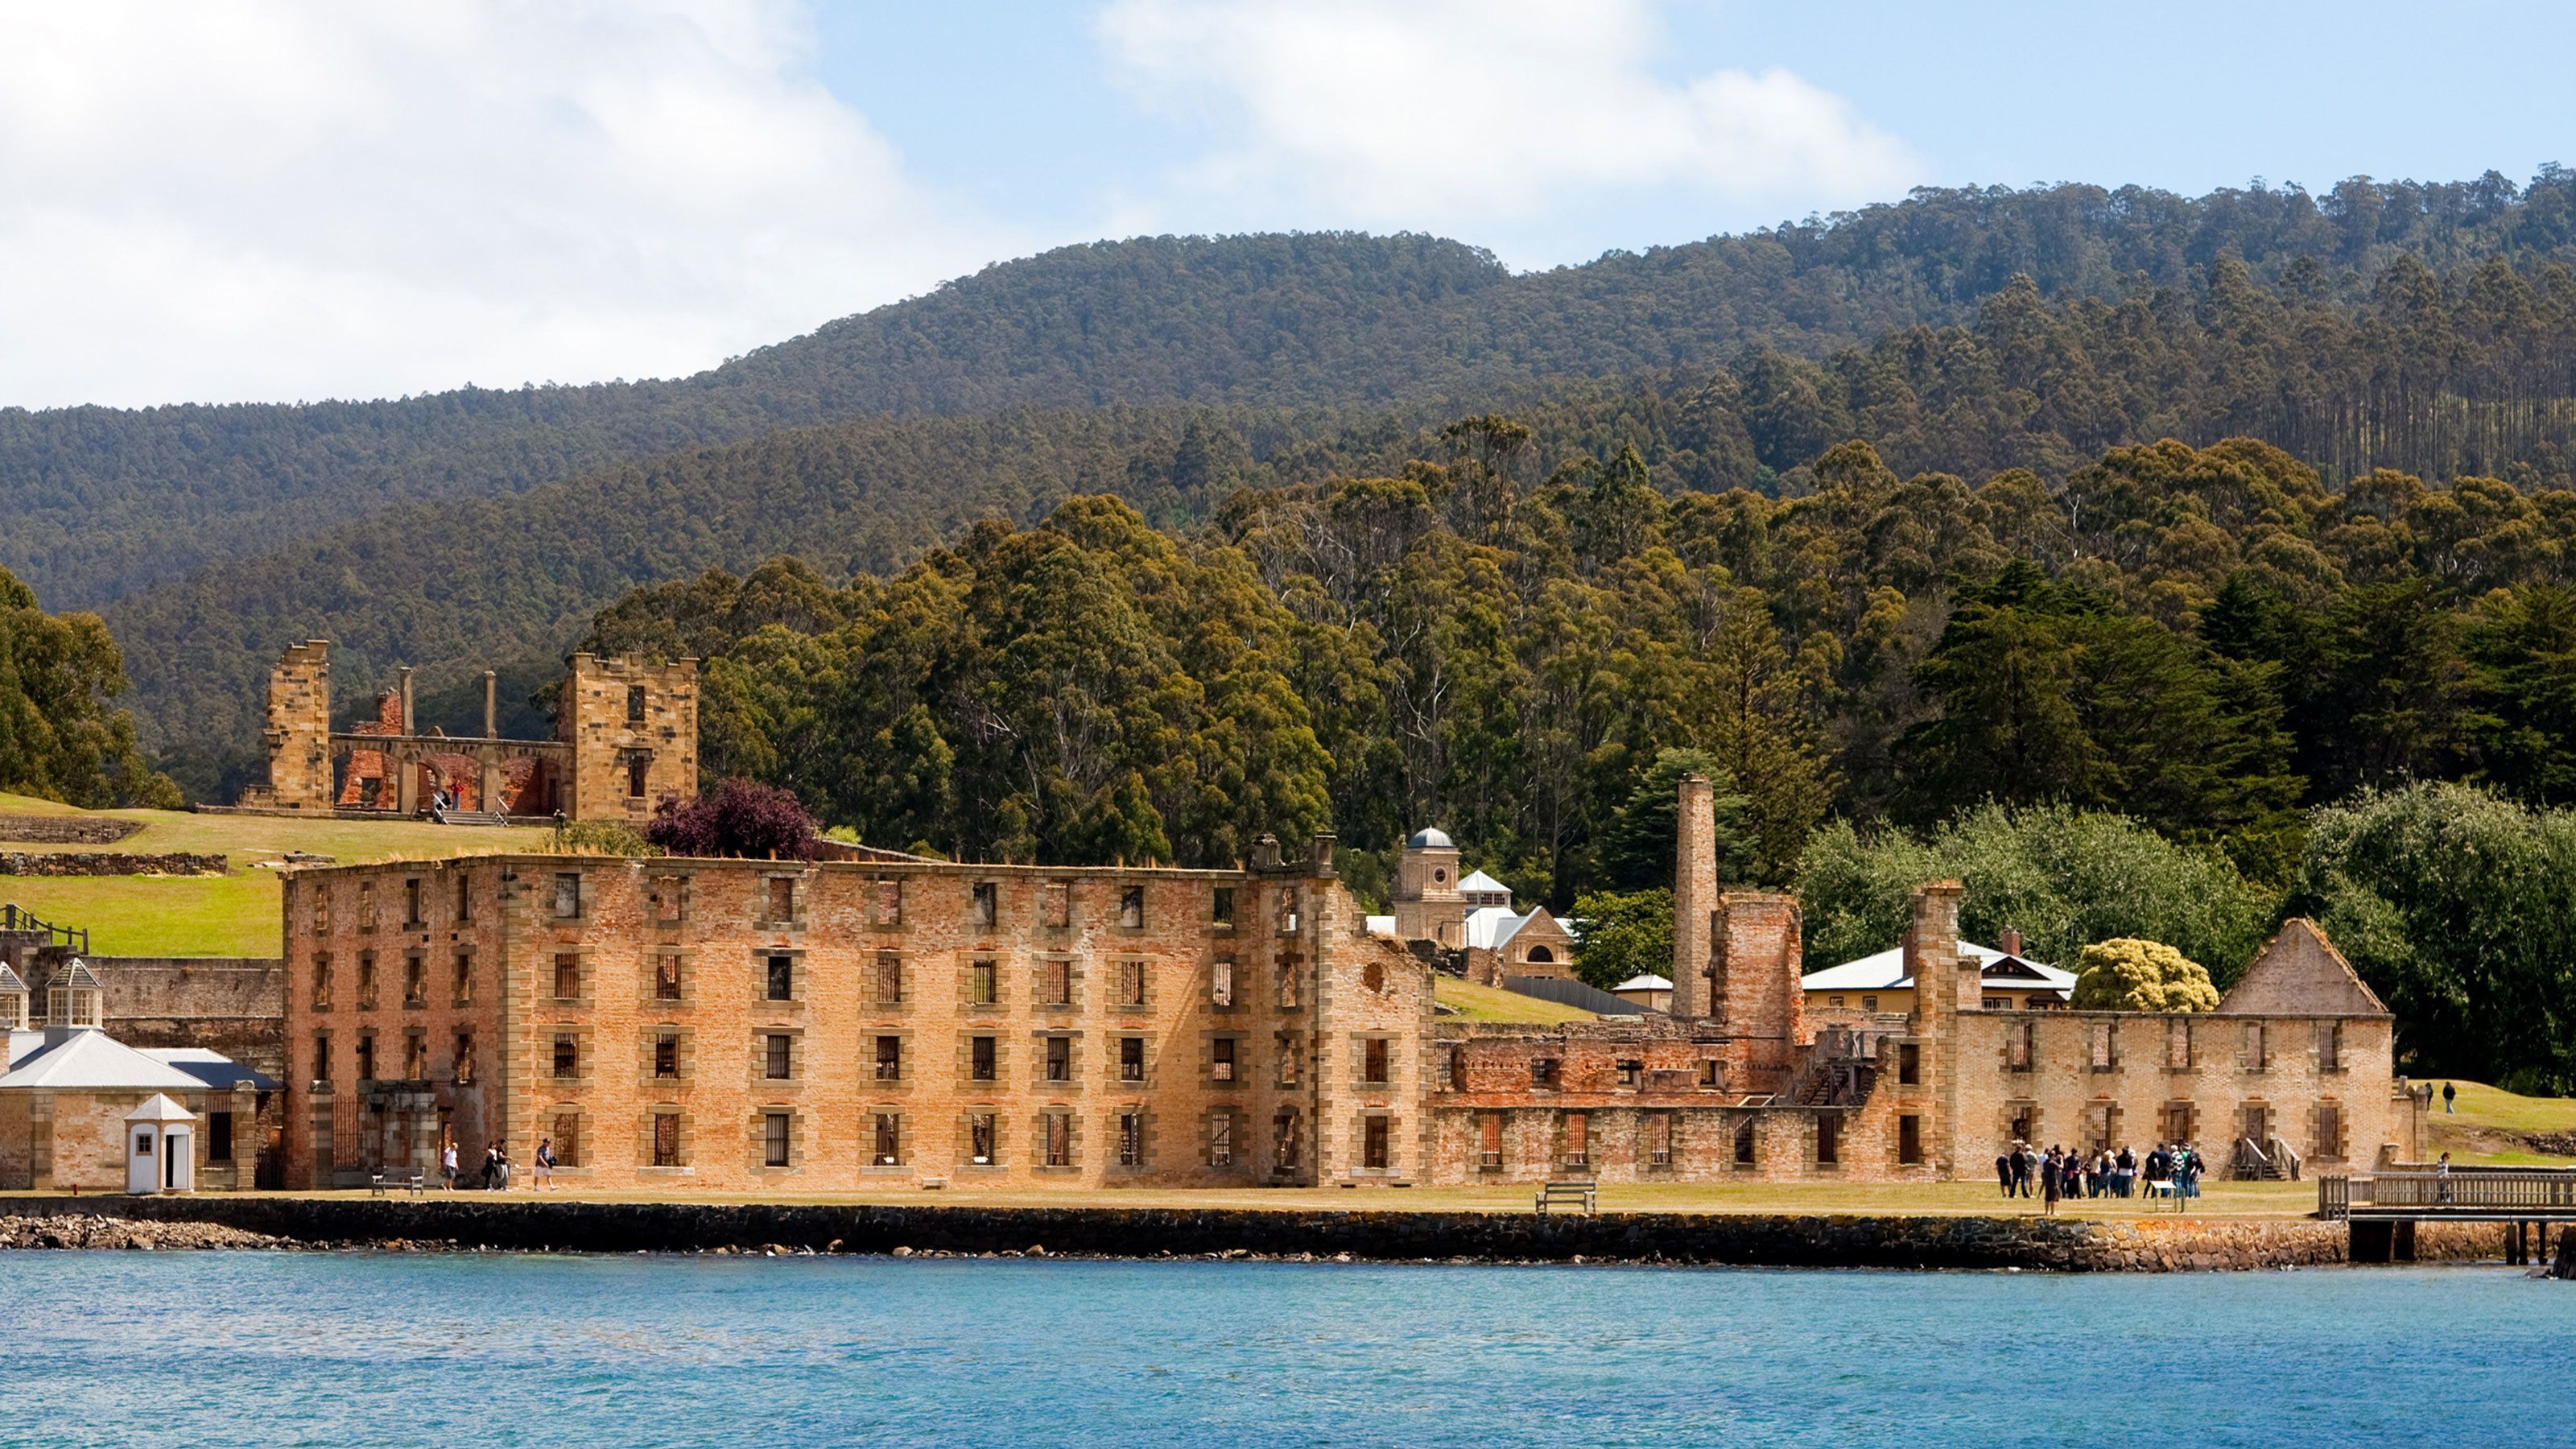 Grand Port Arthur Tour with Cruise from Hobart by Gray Line